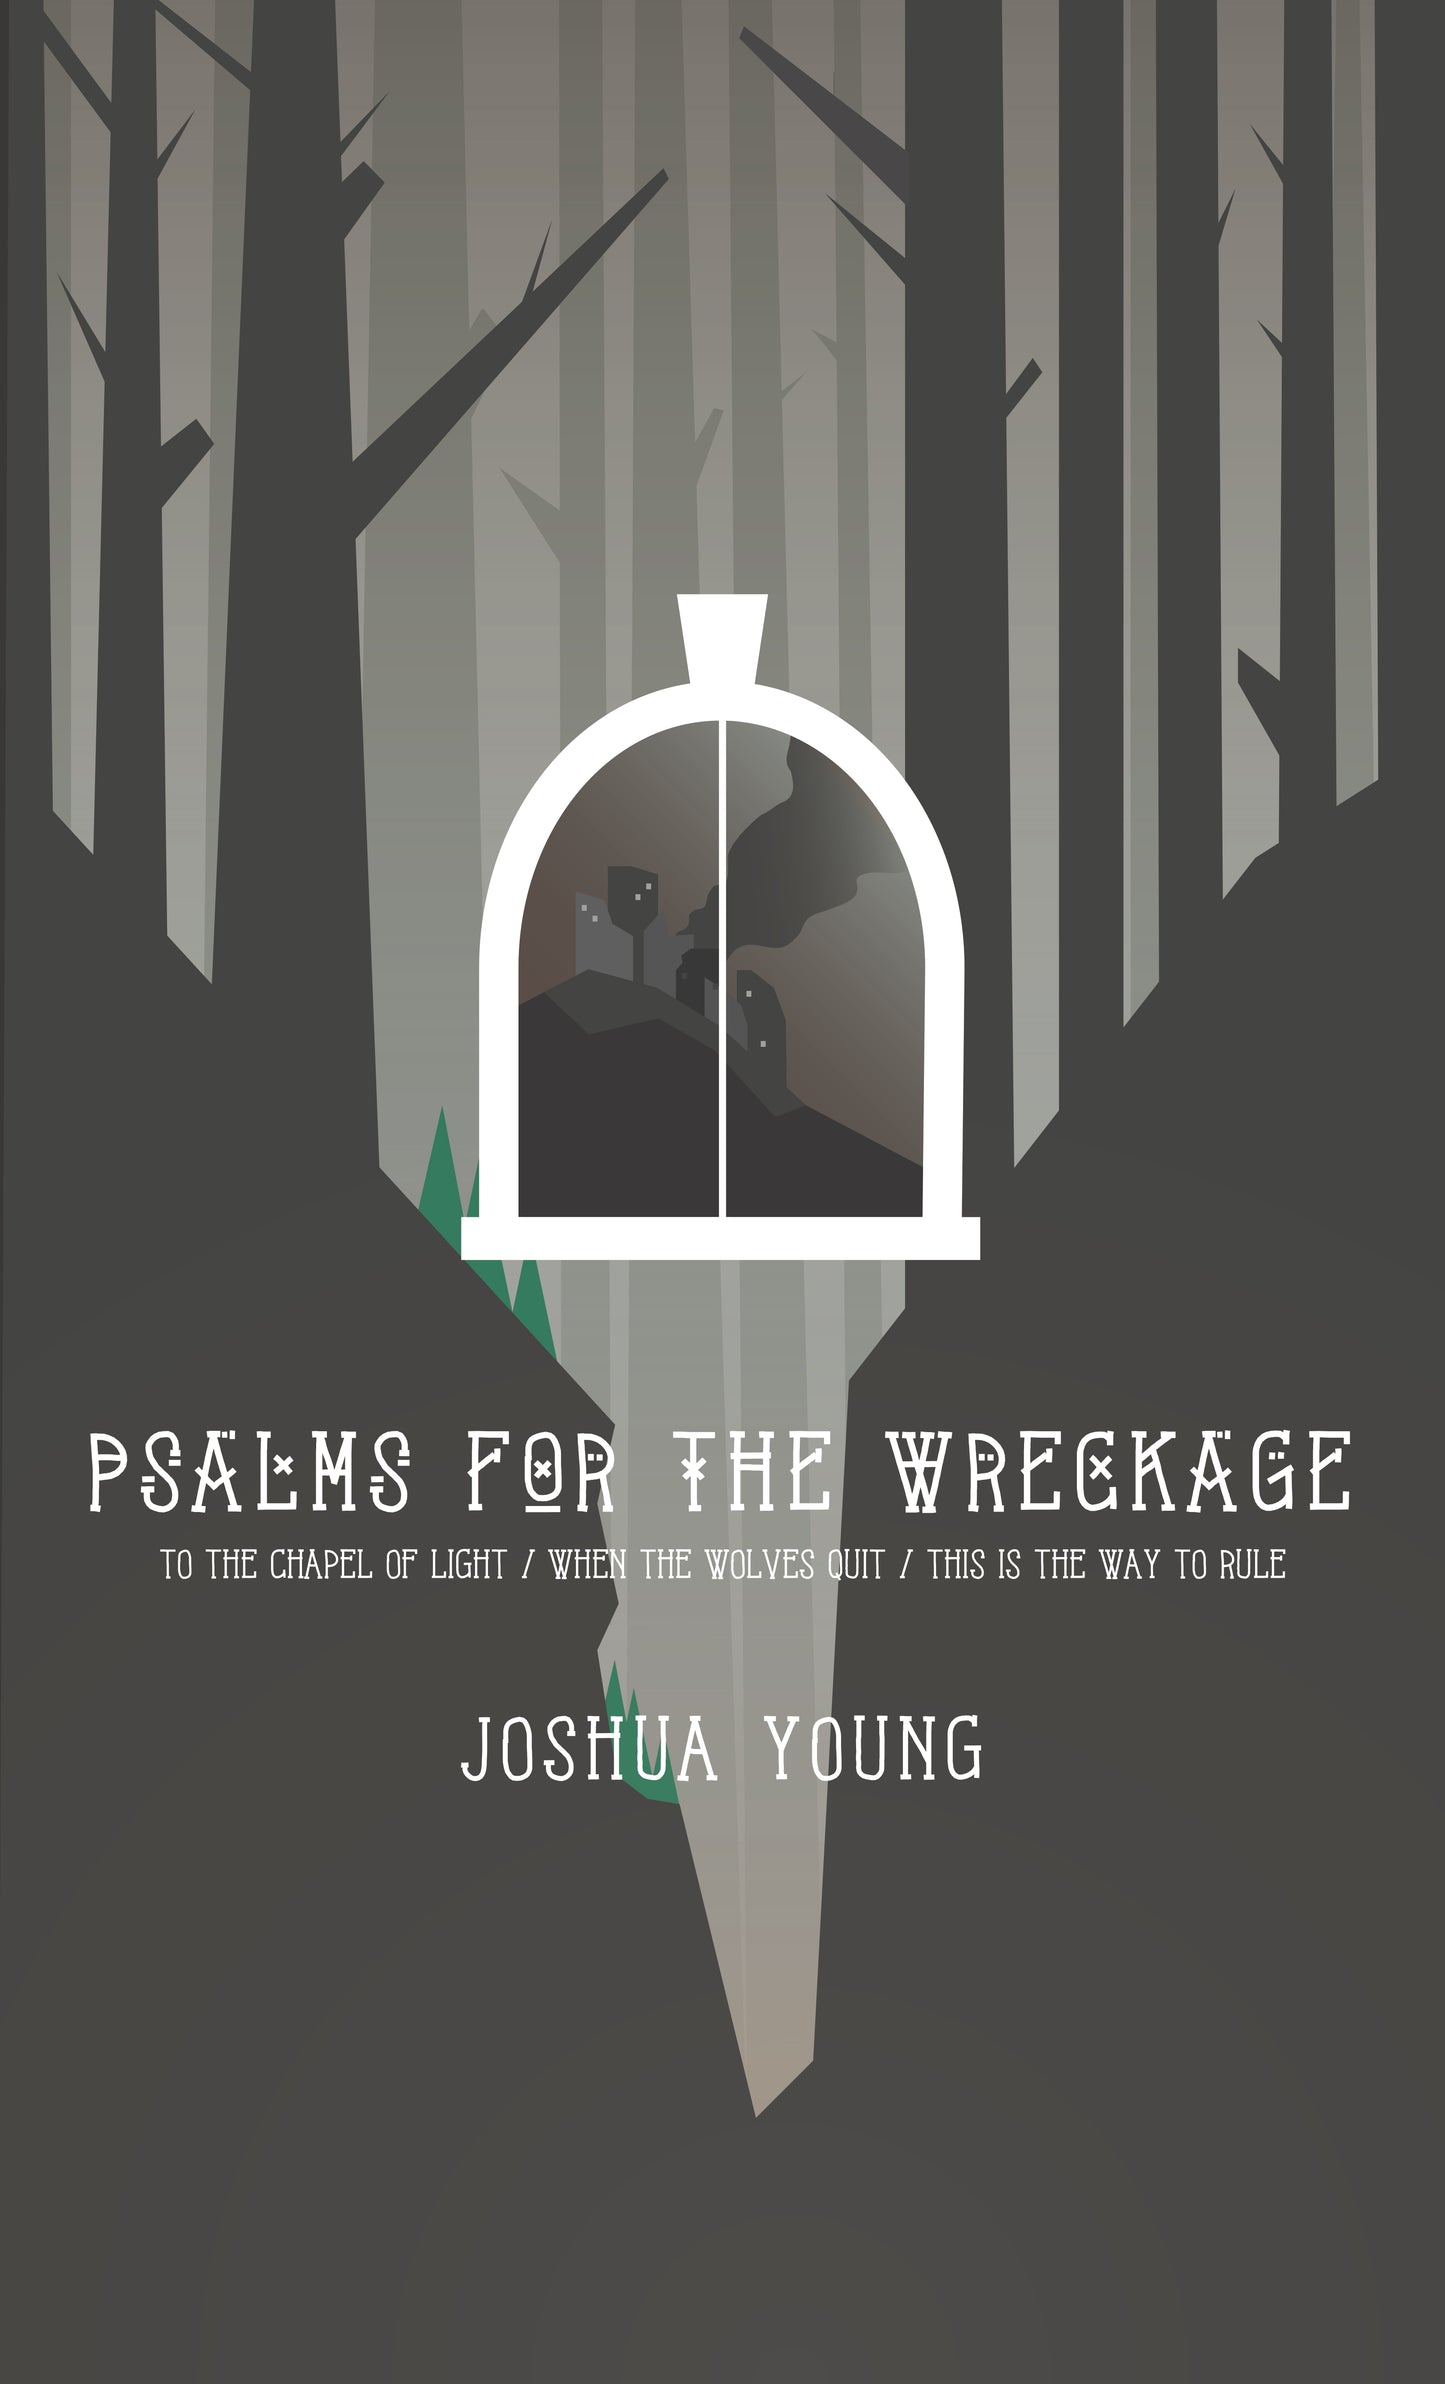 Psalms for the Wreckage: Three Plays by Joshua Young